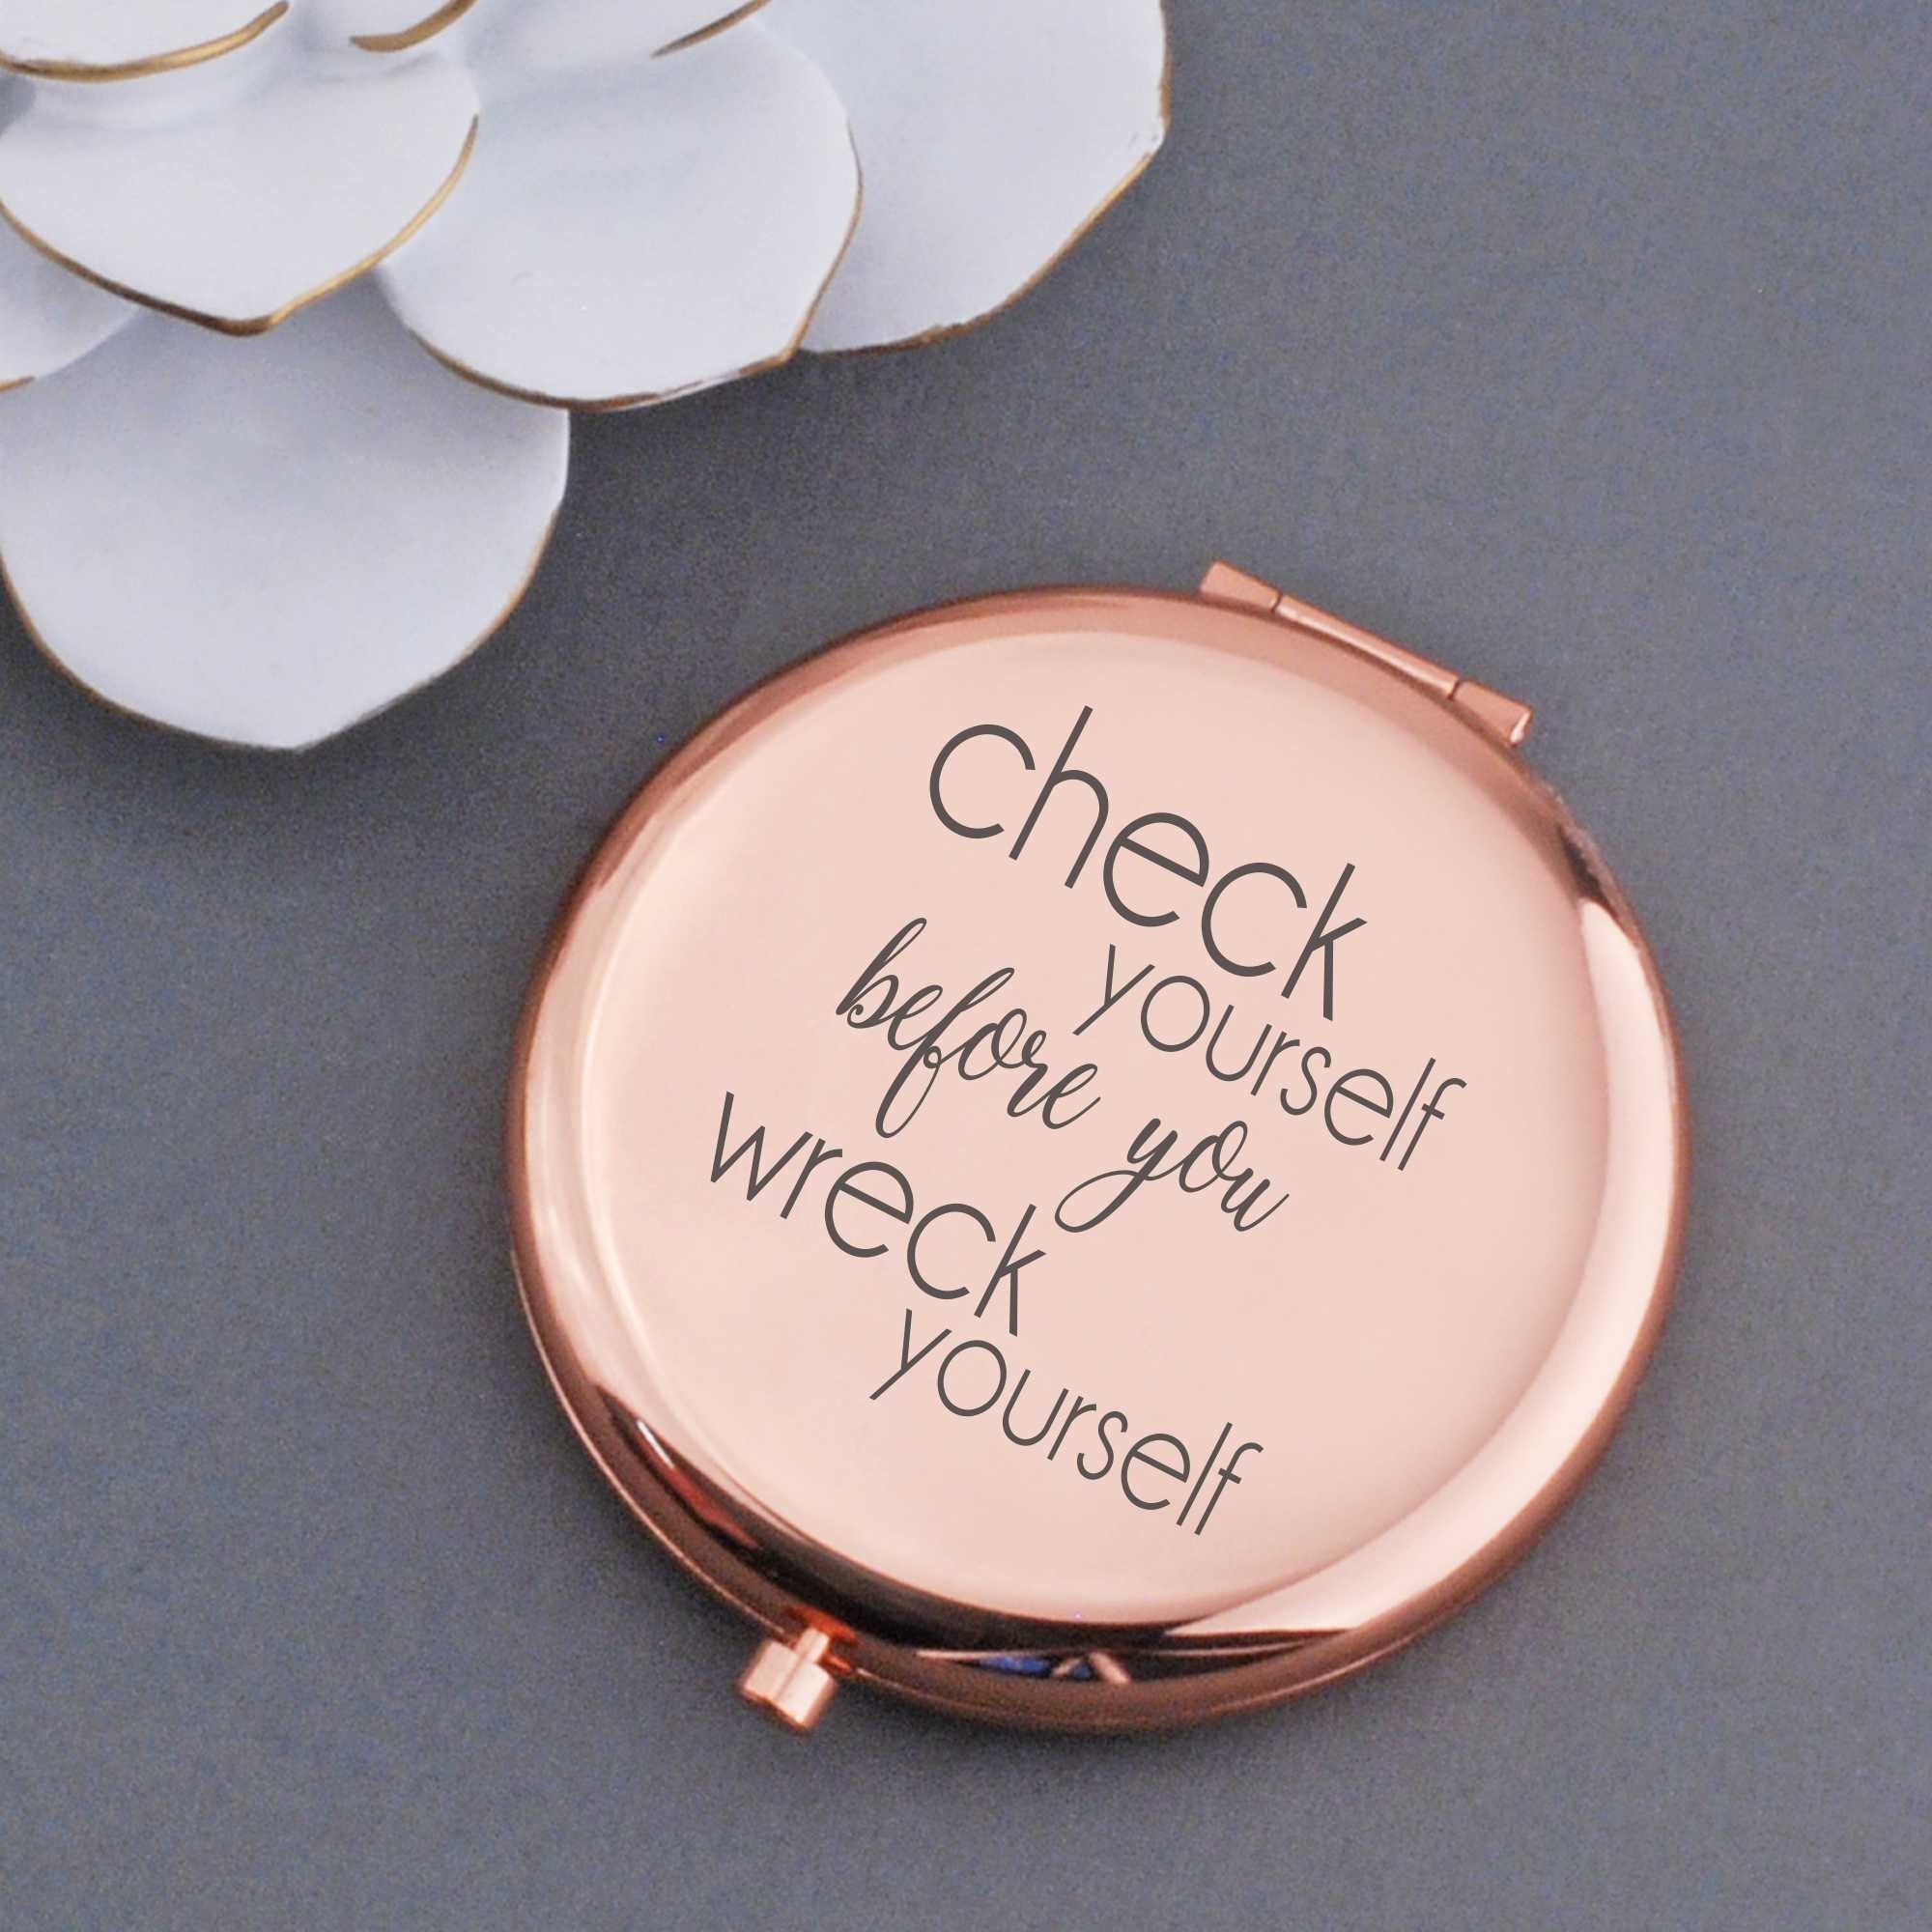 Soulpetals Funny Gifts for Wife Compact Mirror Wife Birthday Gift Ideas Birthday Gifts for Wife from Husband Gift for Her Wedding Anniversary